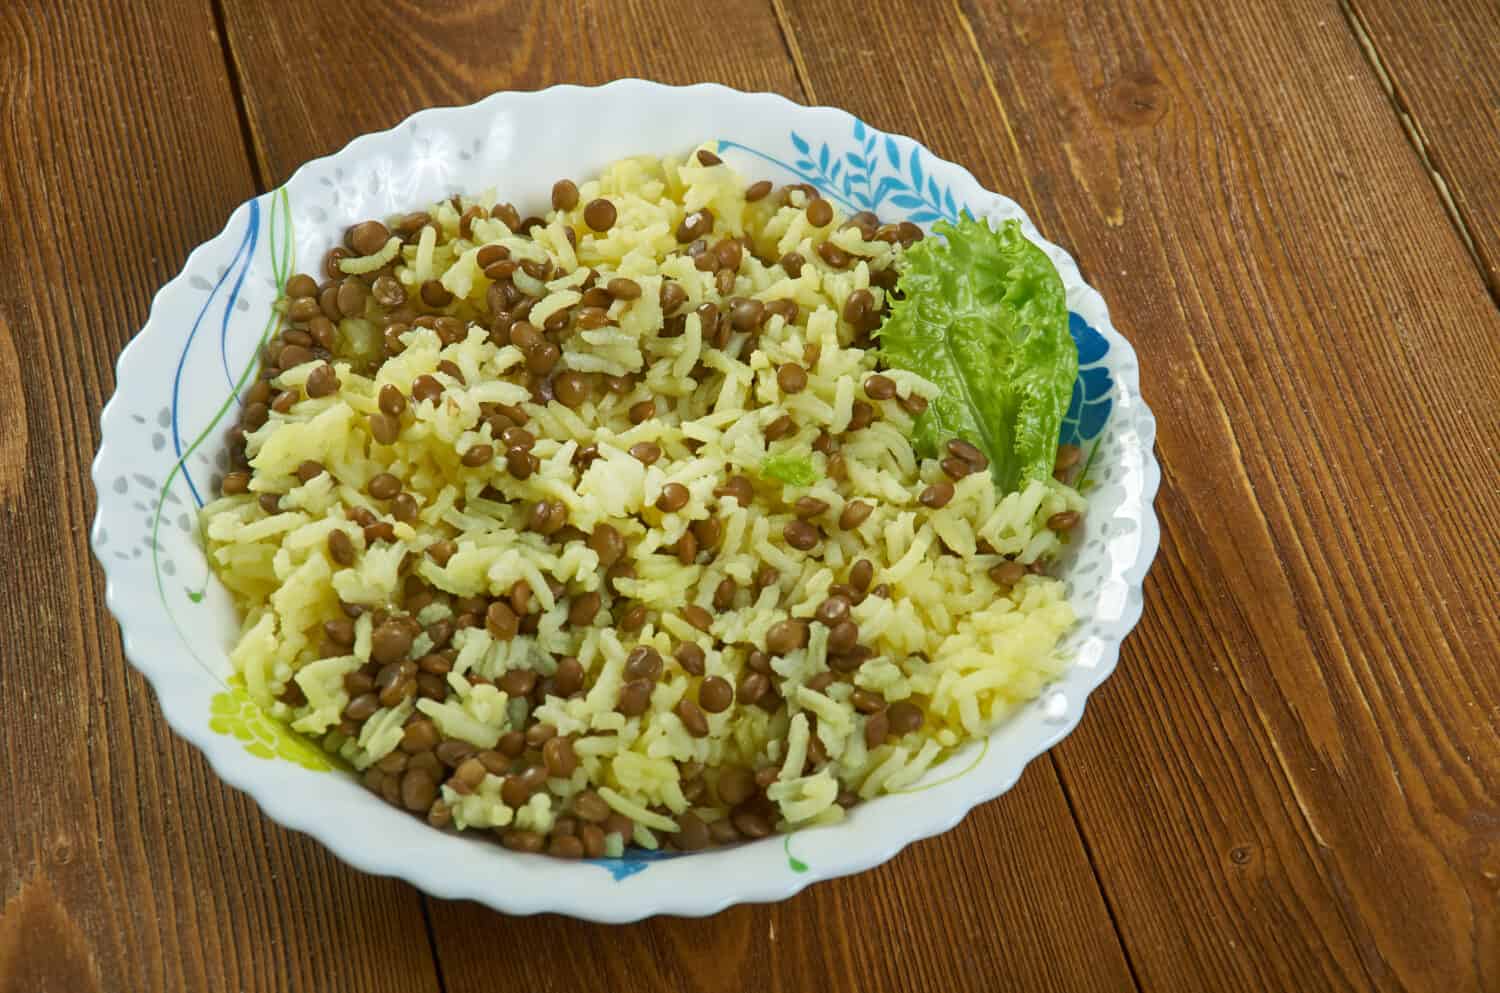 Puerto Rican Fried Rice arroz chino, very popular in Puerto Rico